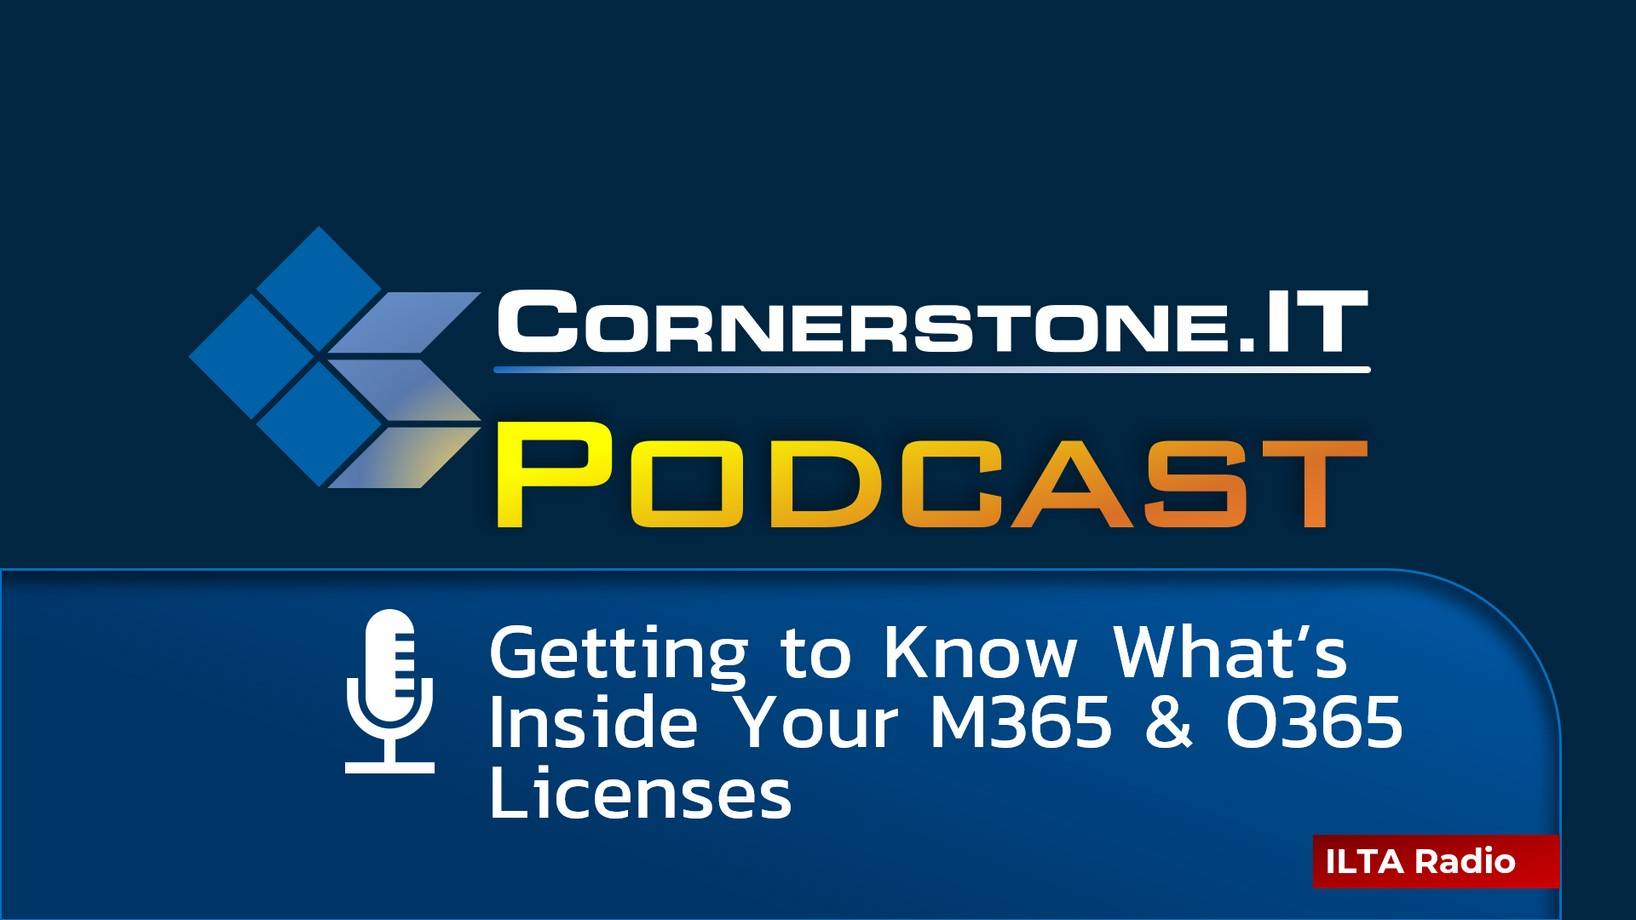 Getting to Know What’s Inside Your M365 & O365 Licenses